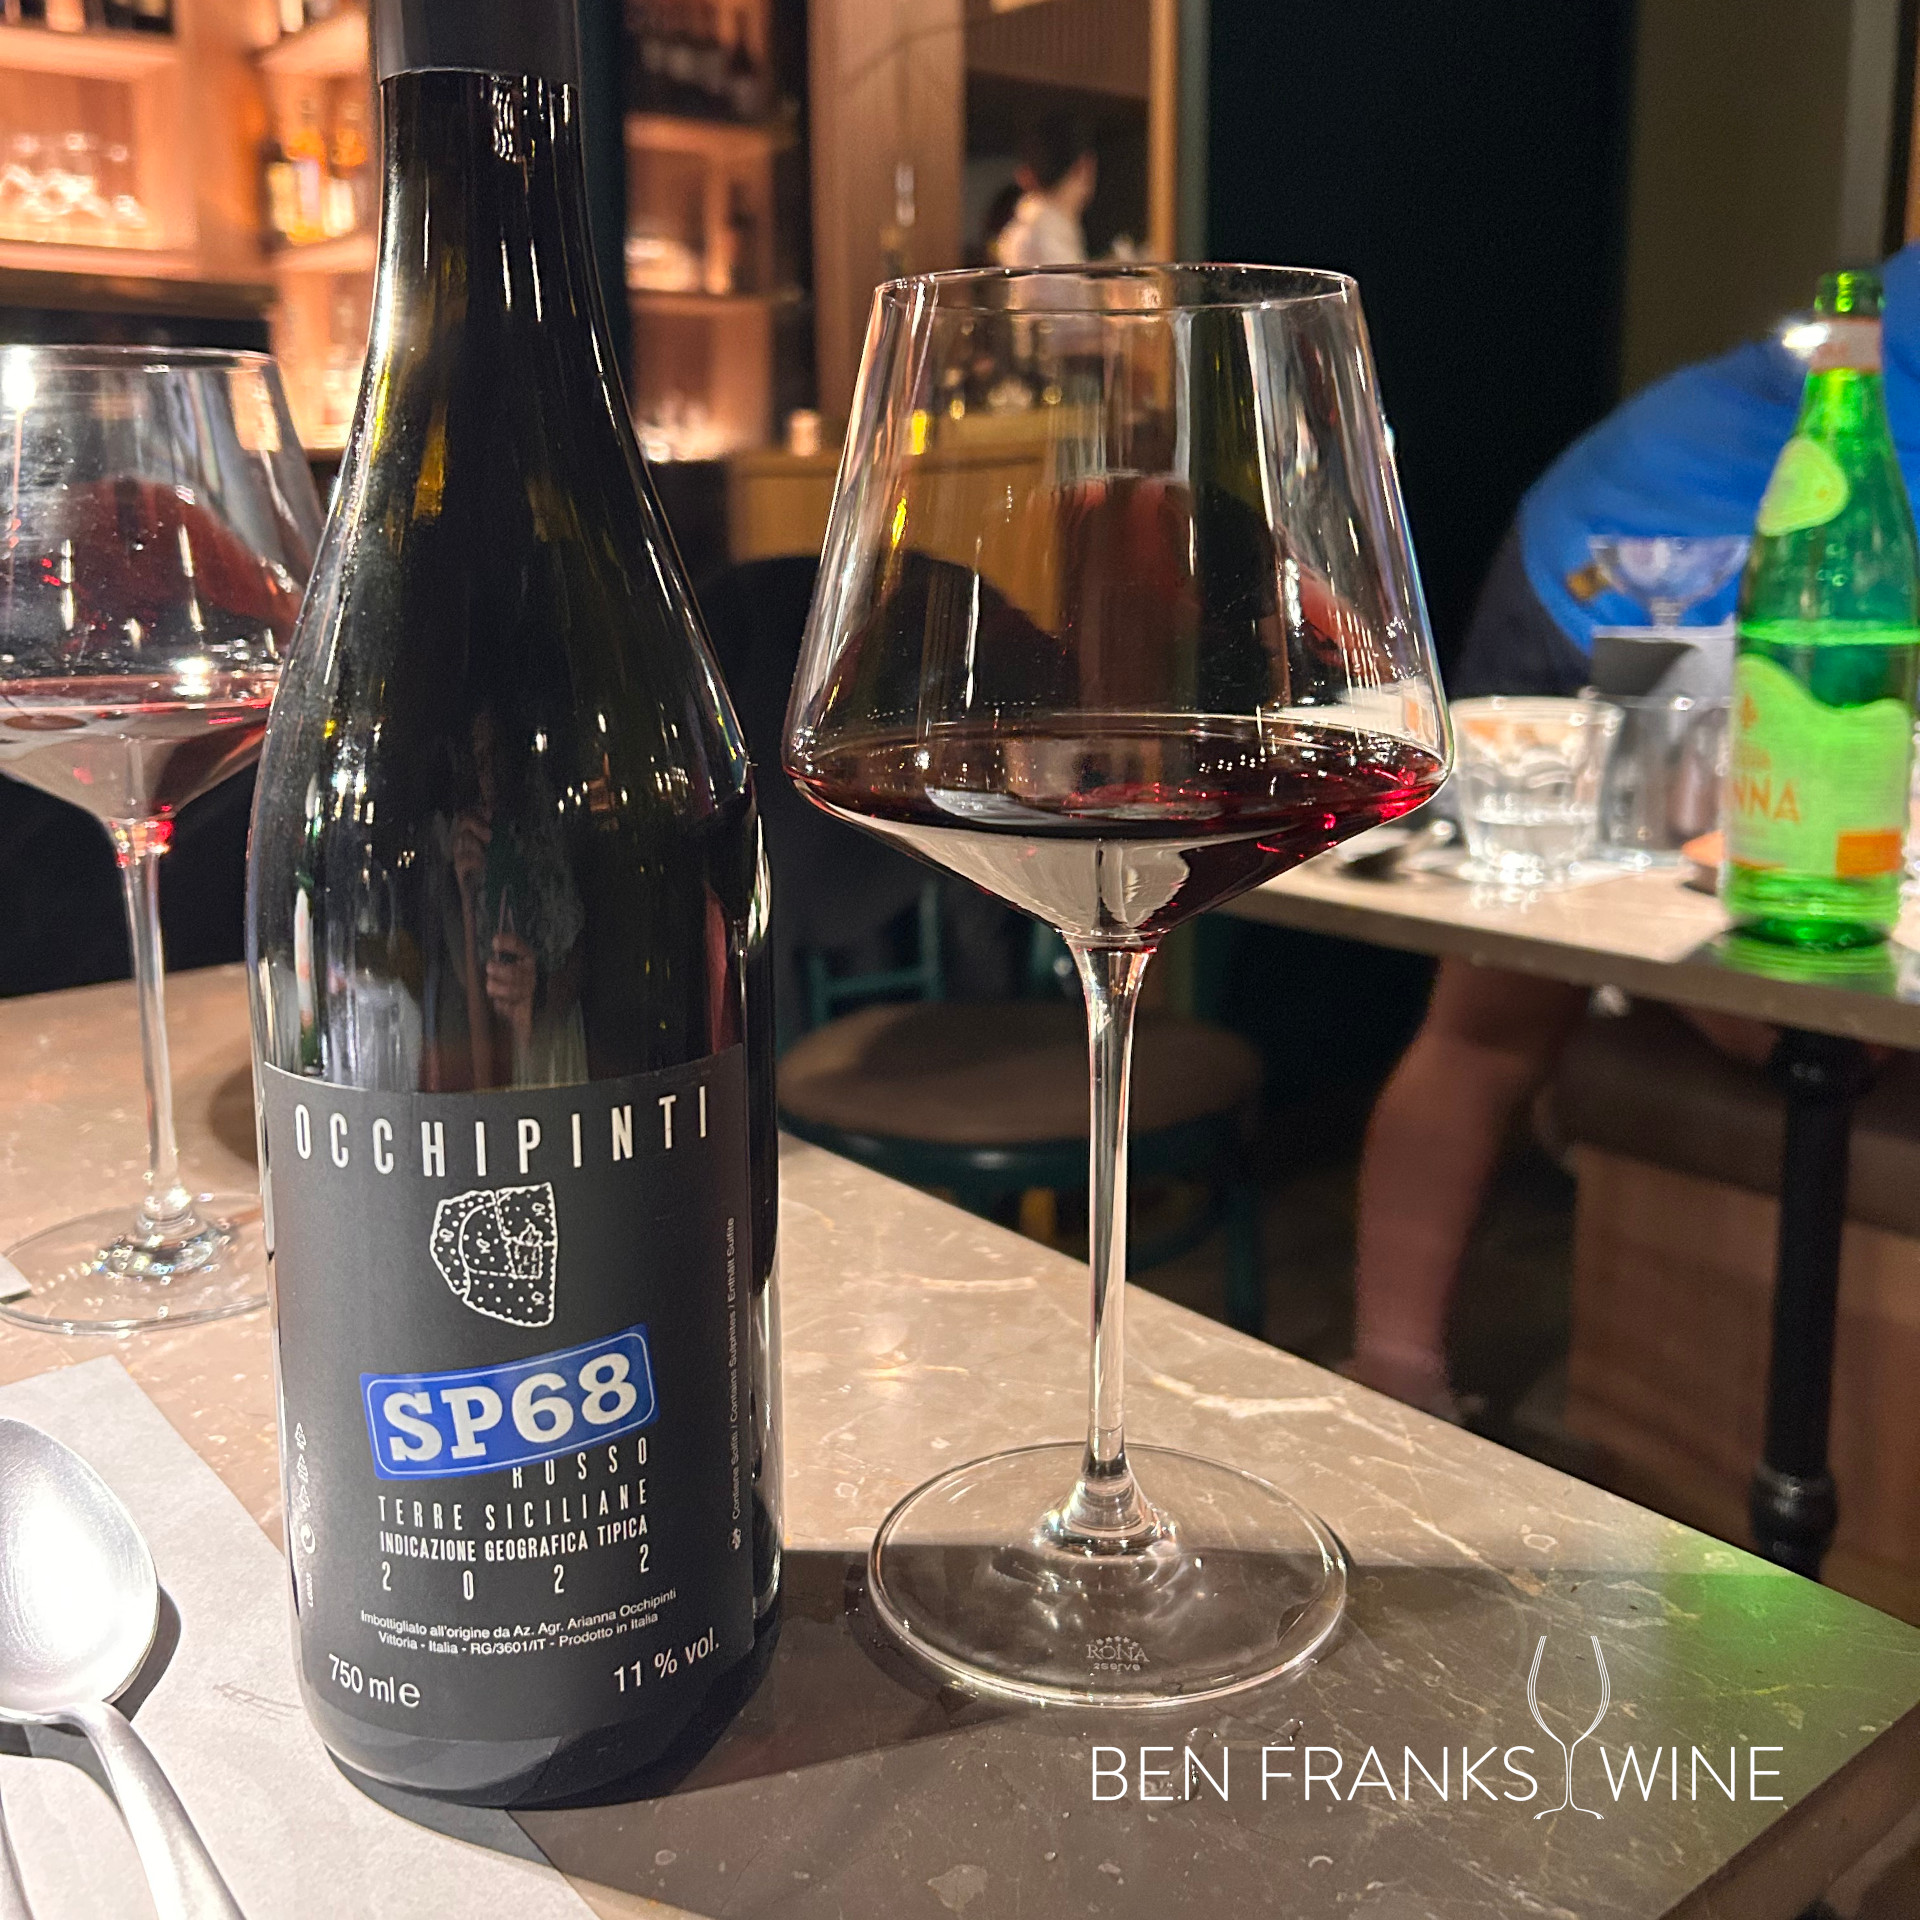 SP68 red wine from Arianna Occhipinti